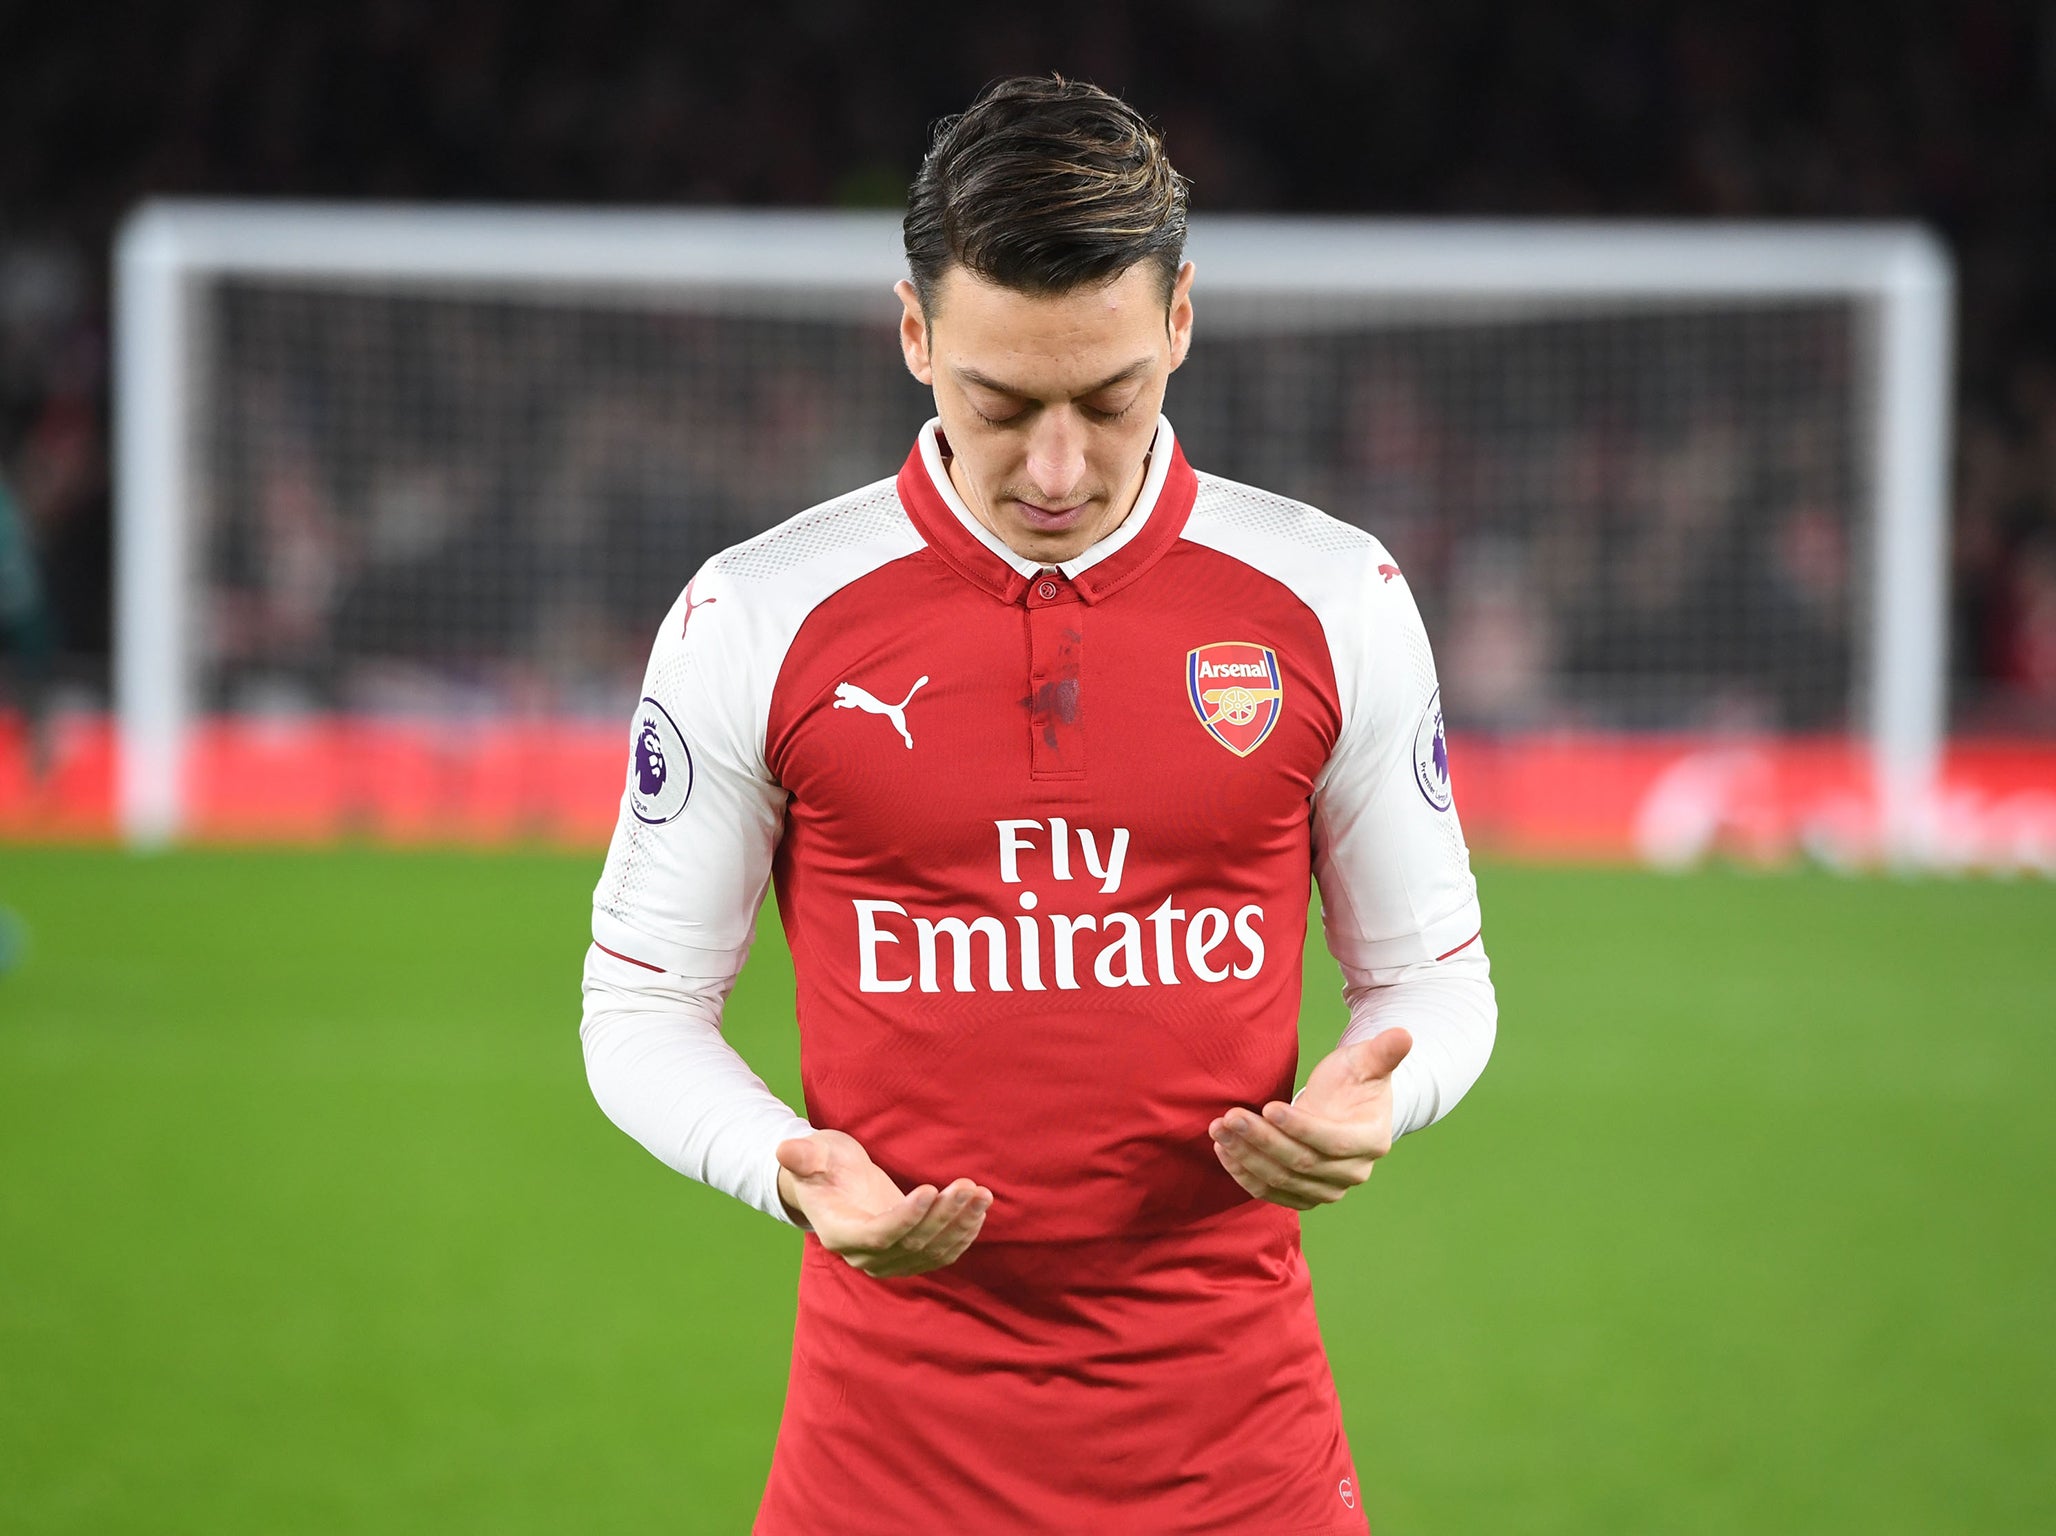 Mesut Ozil has finally agreed to extend his stay at the club